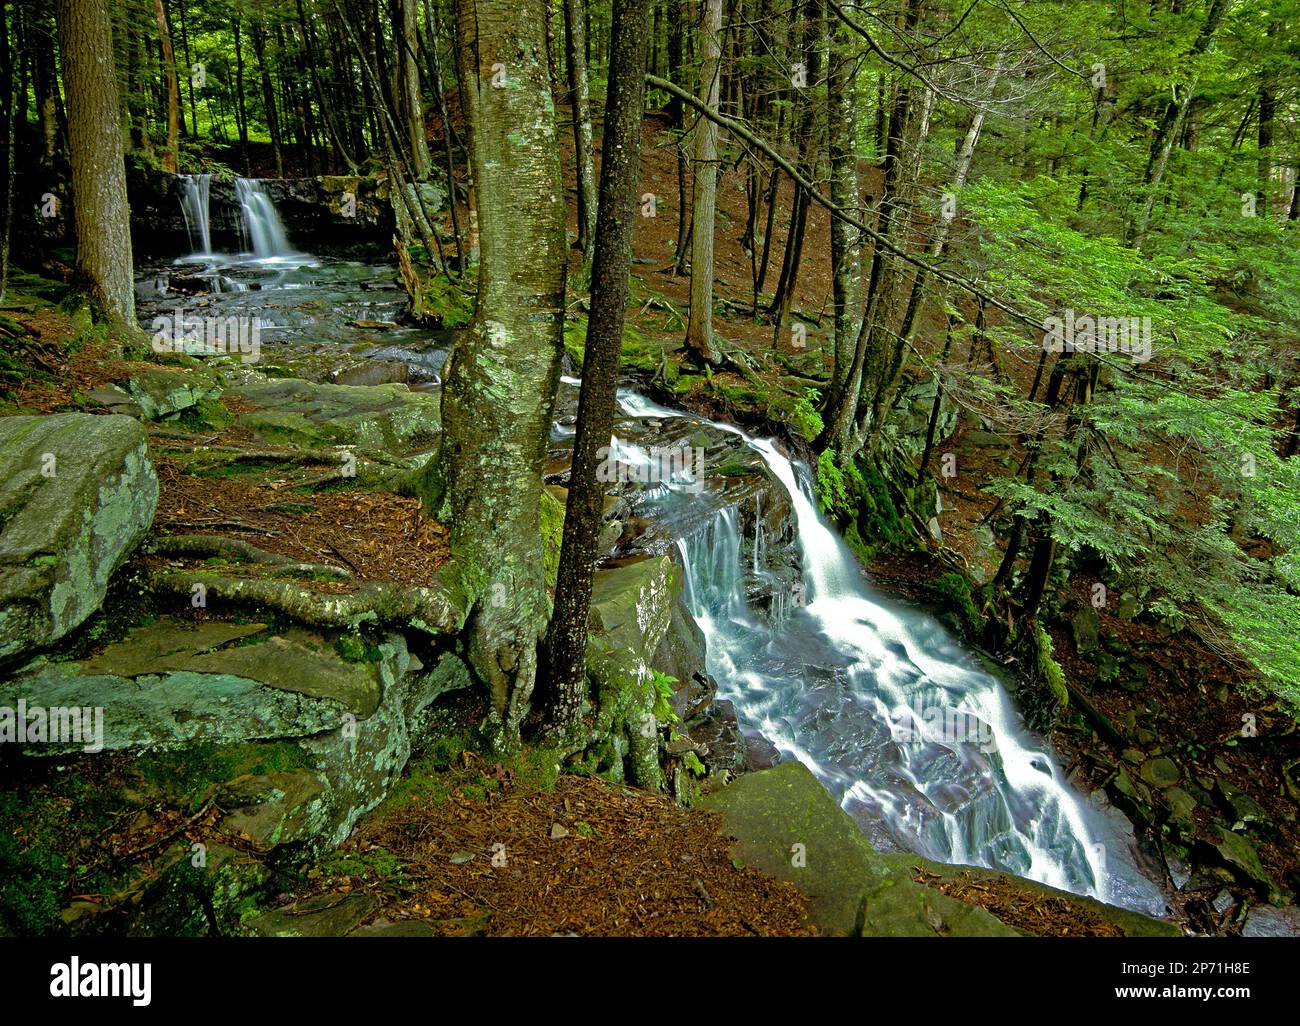 Dutchman Falls, also known as Amber Falls, in Loyalsock State Forest, Pennsylvania Stock Photo